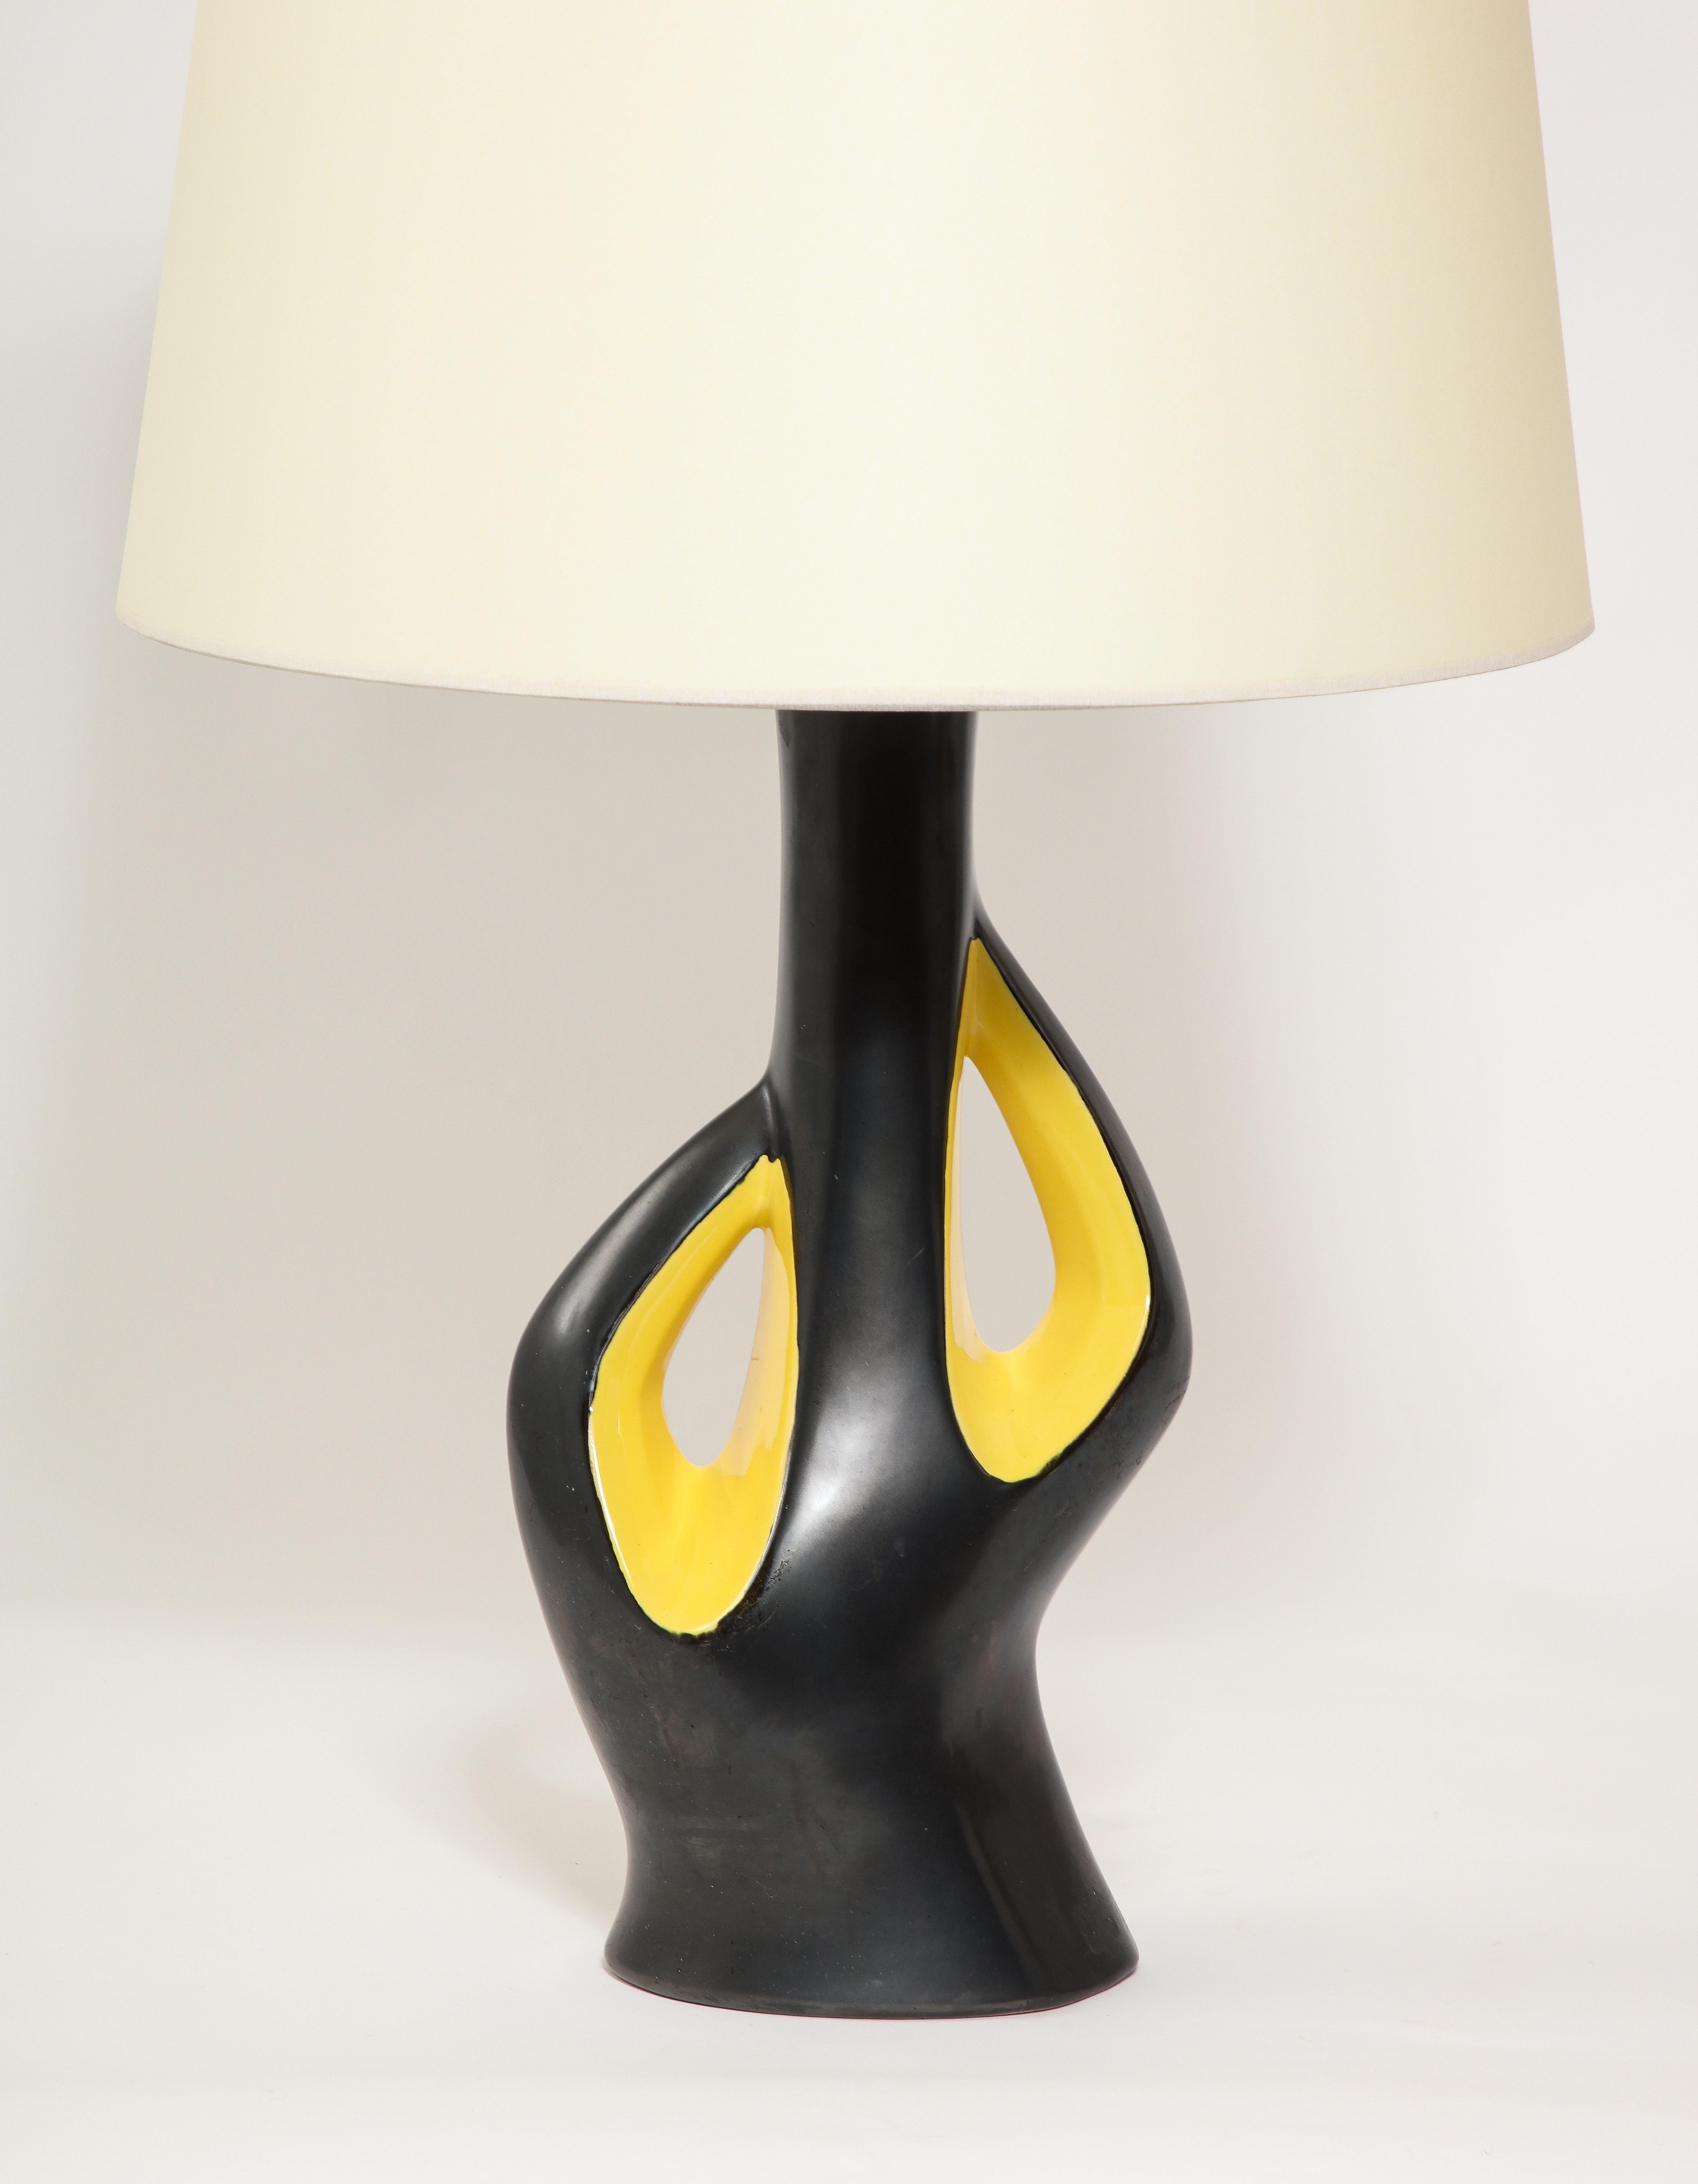 Large Elchinger Two-Tone Yellow & Black Ceramic Table Lamp, France 1950's For Sale 6